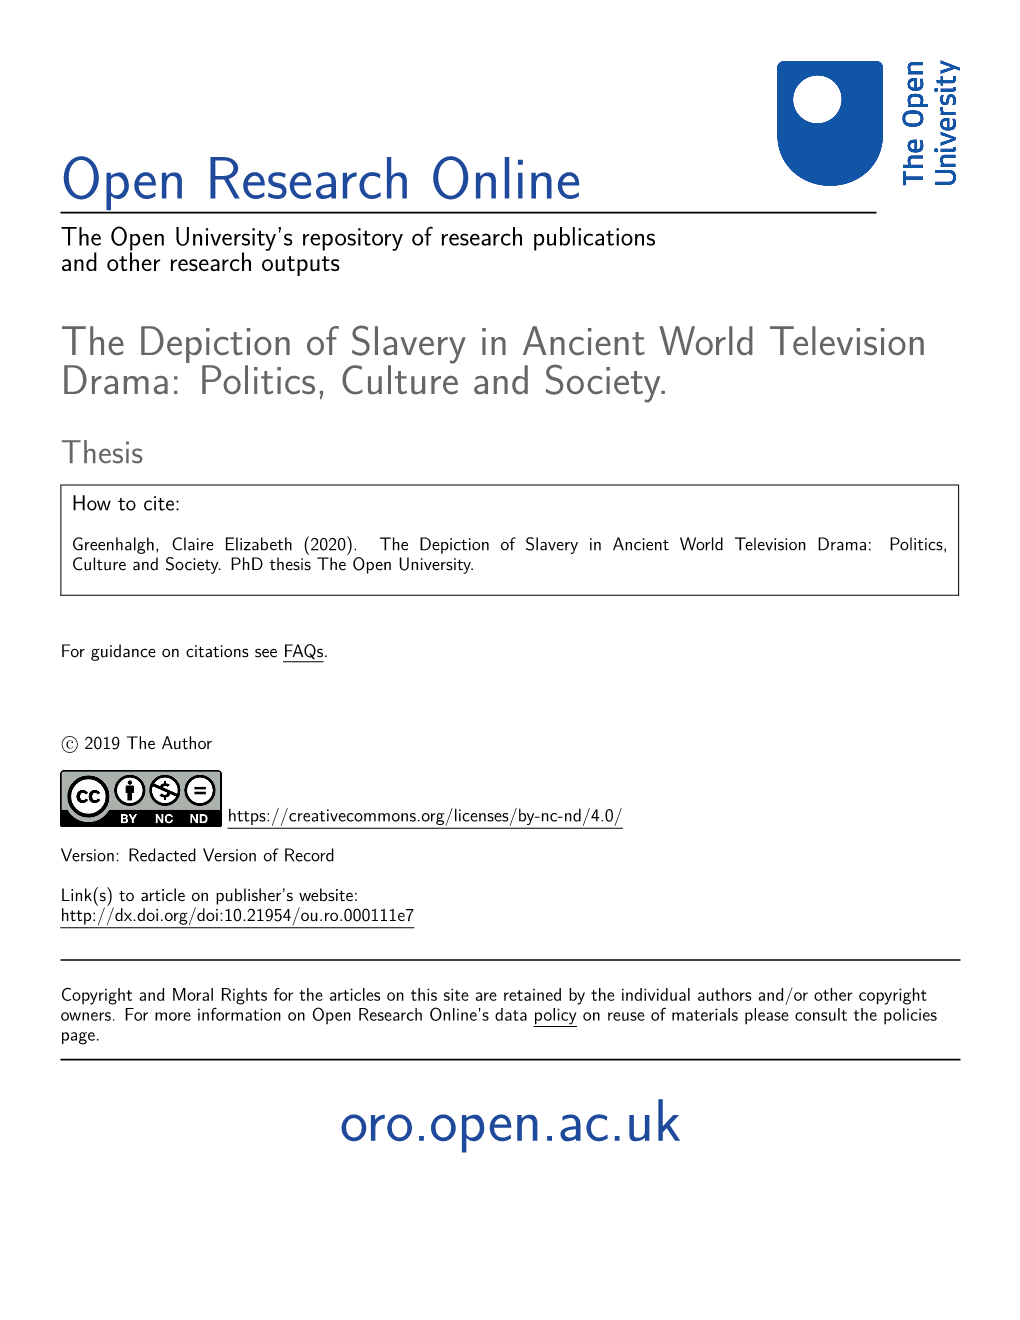 The Depiction of Slavery in Ancient World Television Drama: Politics, Culture and Society